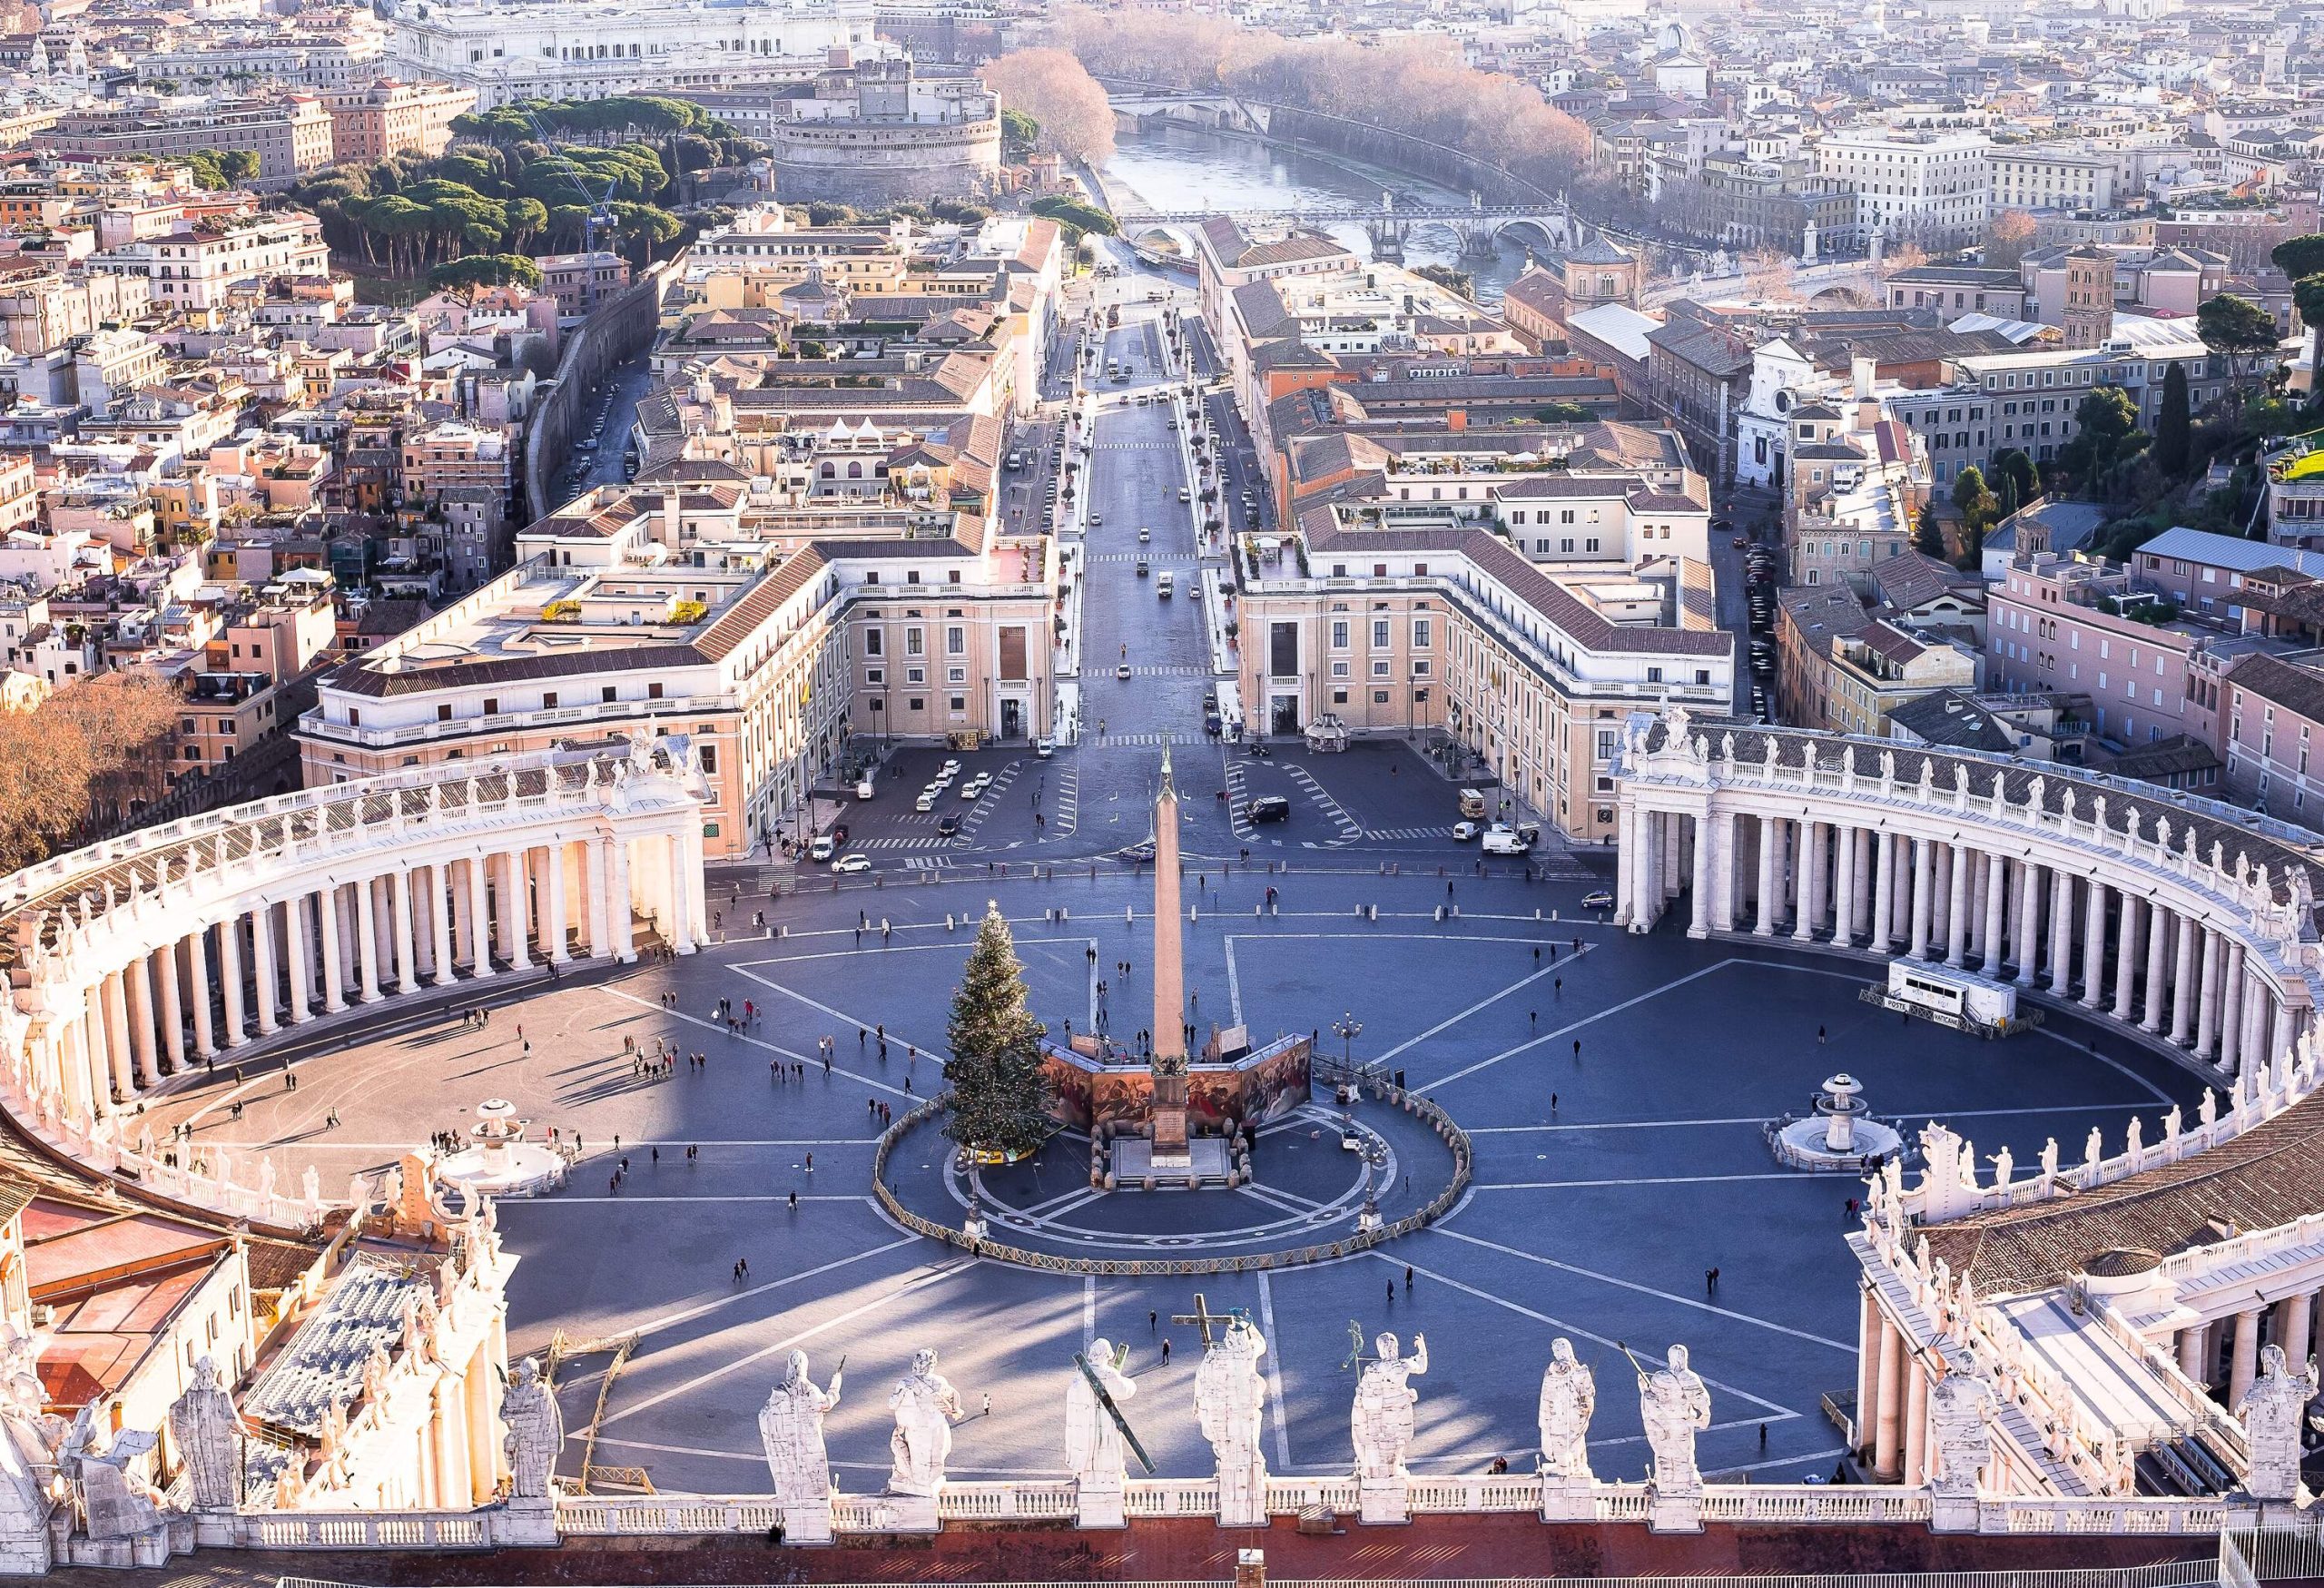 Aerial view of the Vatican city shows Saint Peter's Square with an ancient Egyptian obelisk next to a tall Christmas tree in the centre.